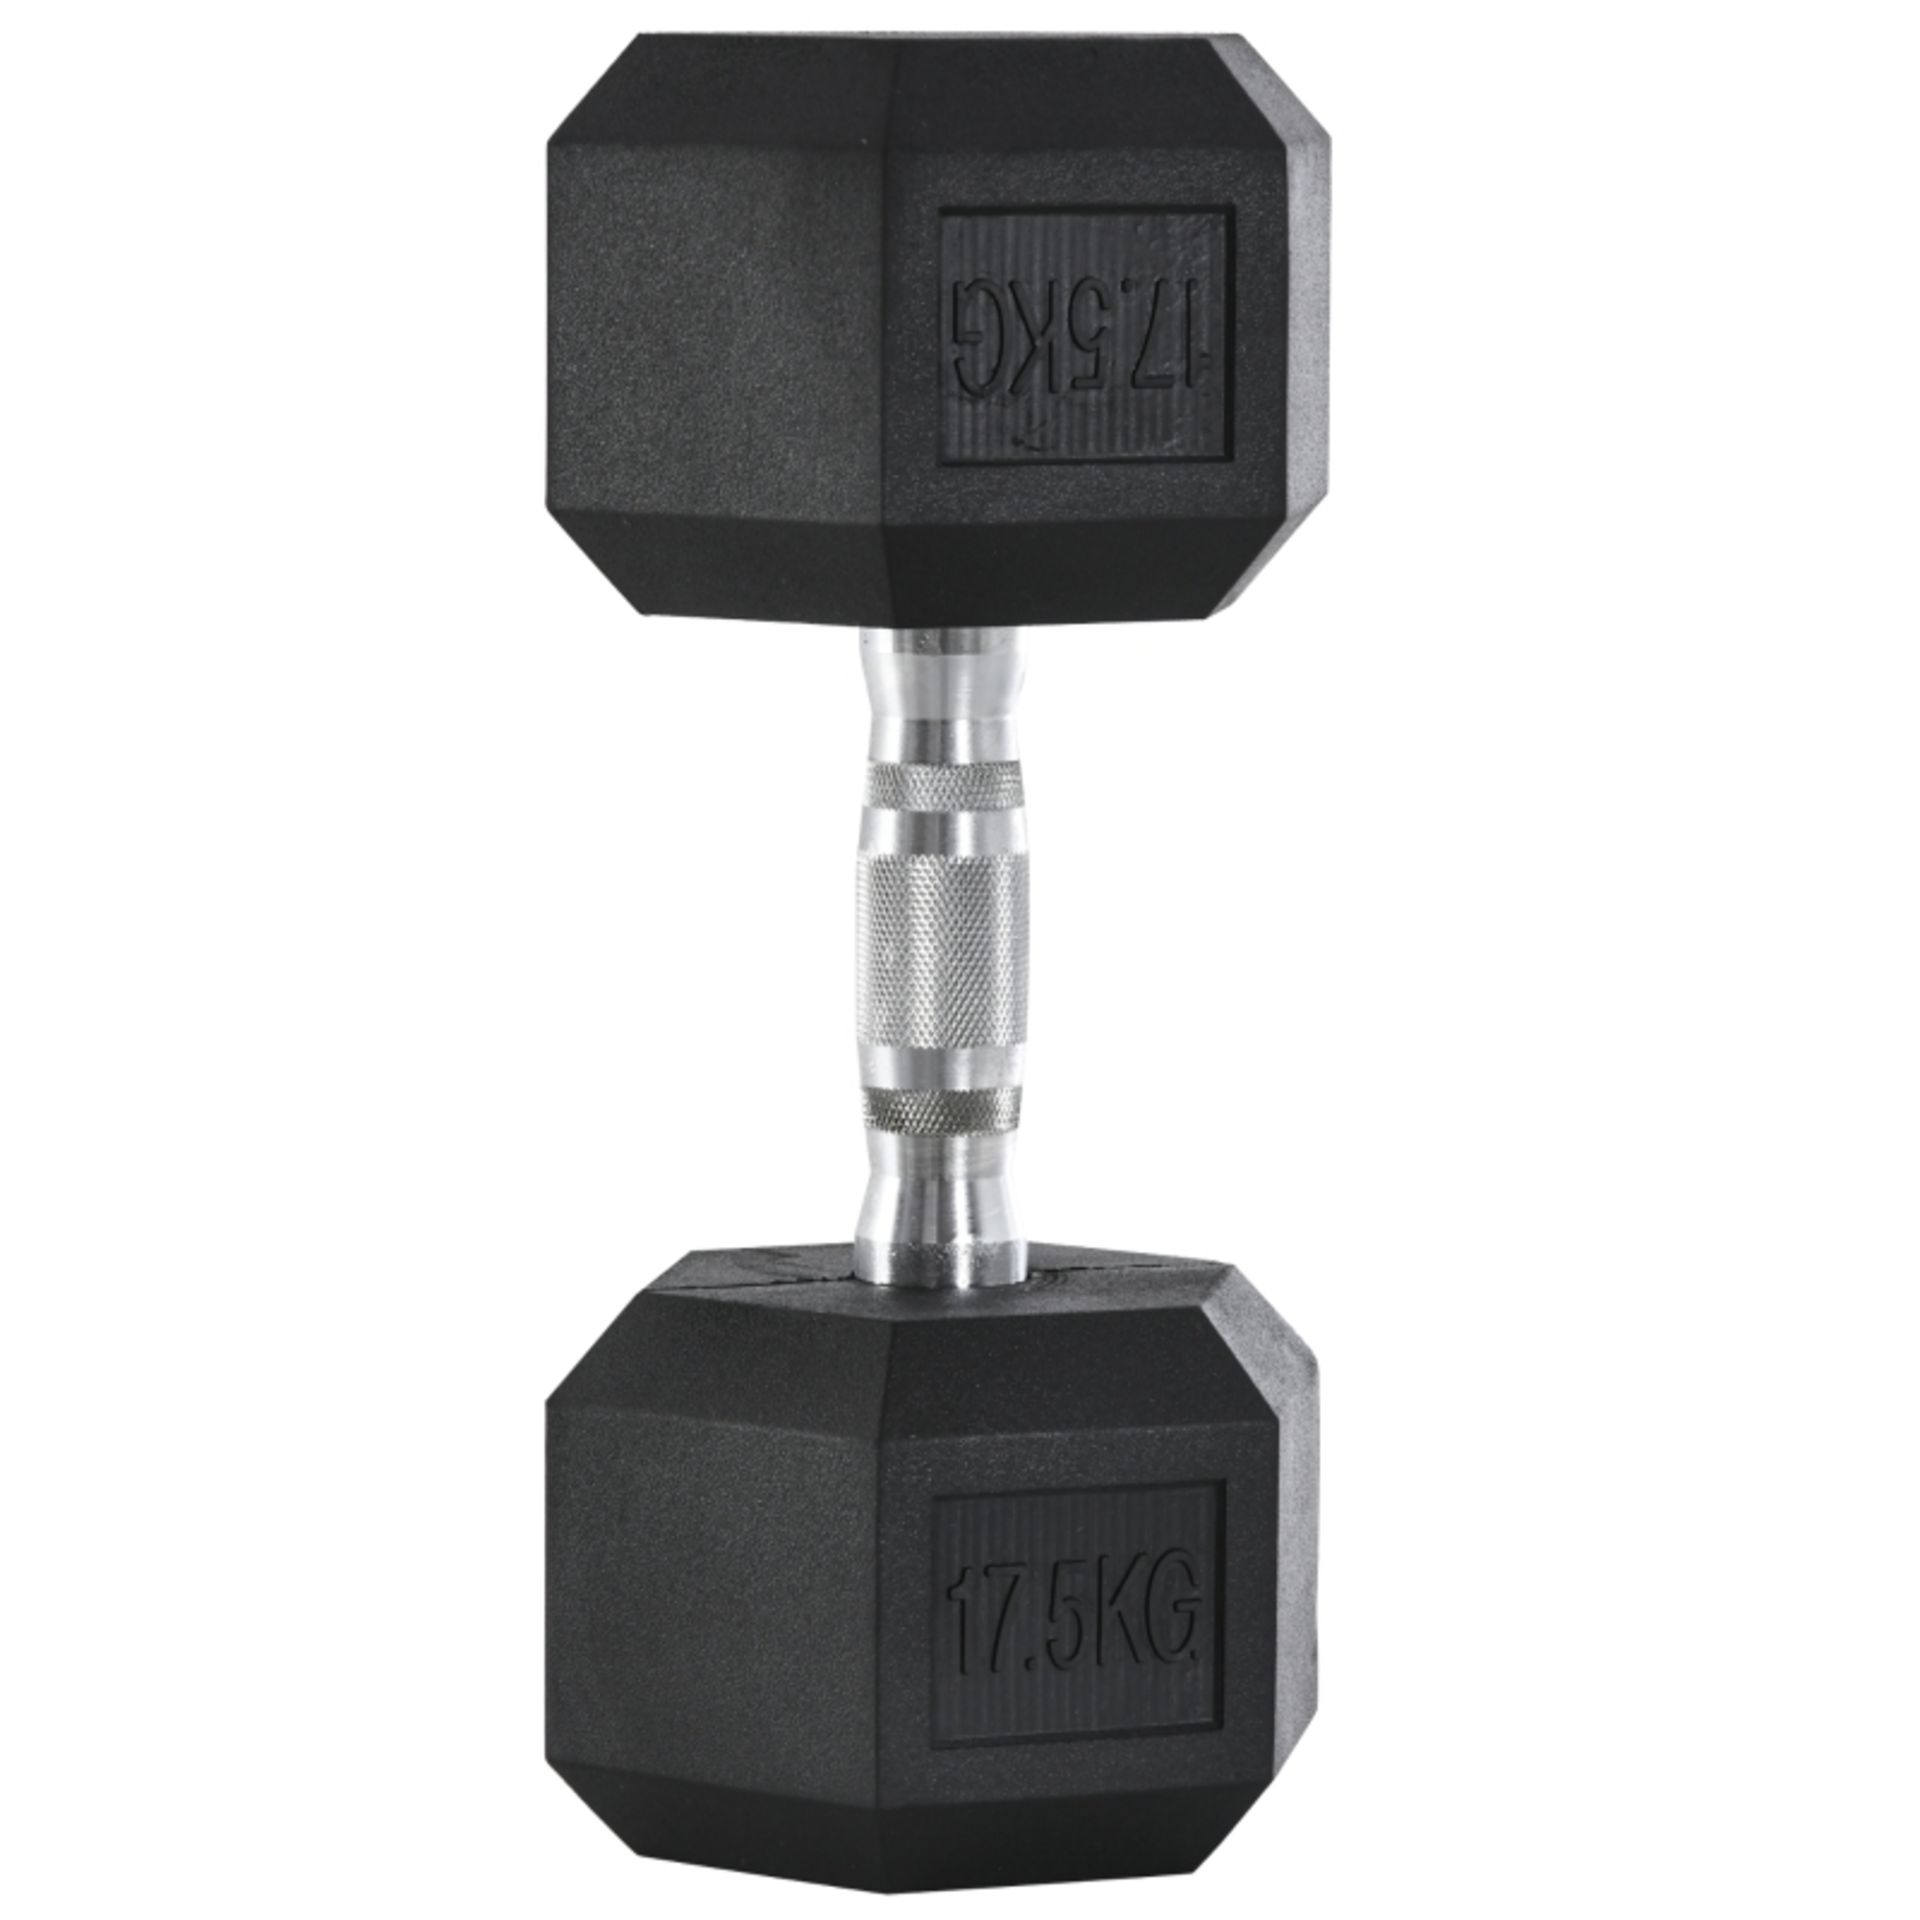 RRP £46.99 - 17.5KG Single Rubber Hex Dumbbell Portable Hand Weights Dumbbell Home Gym